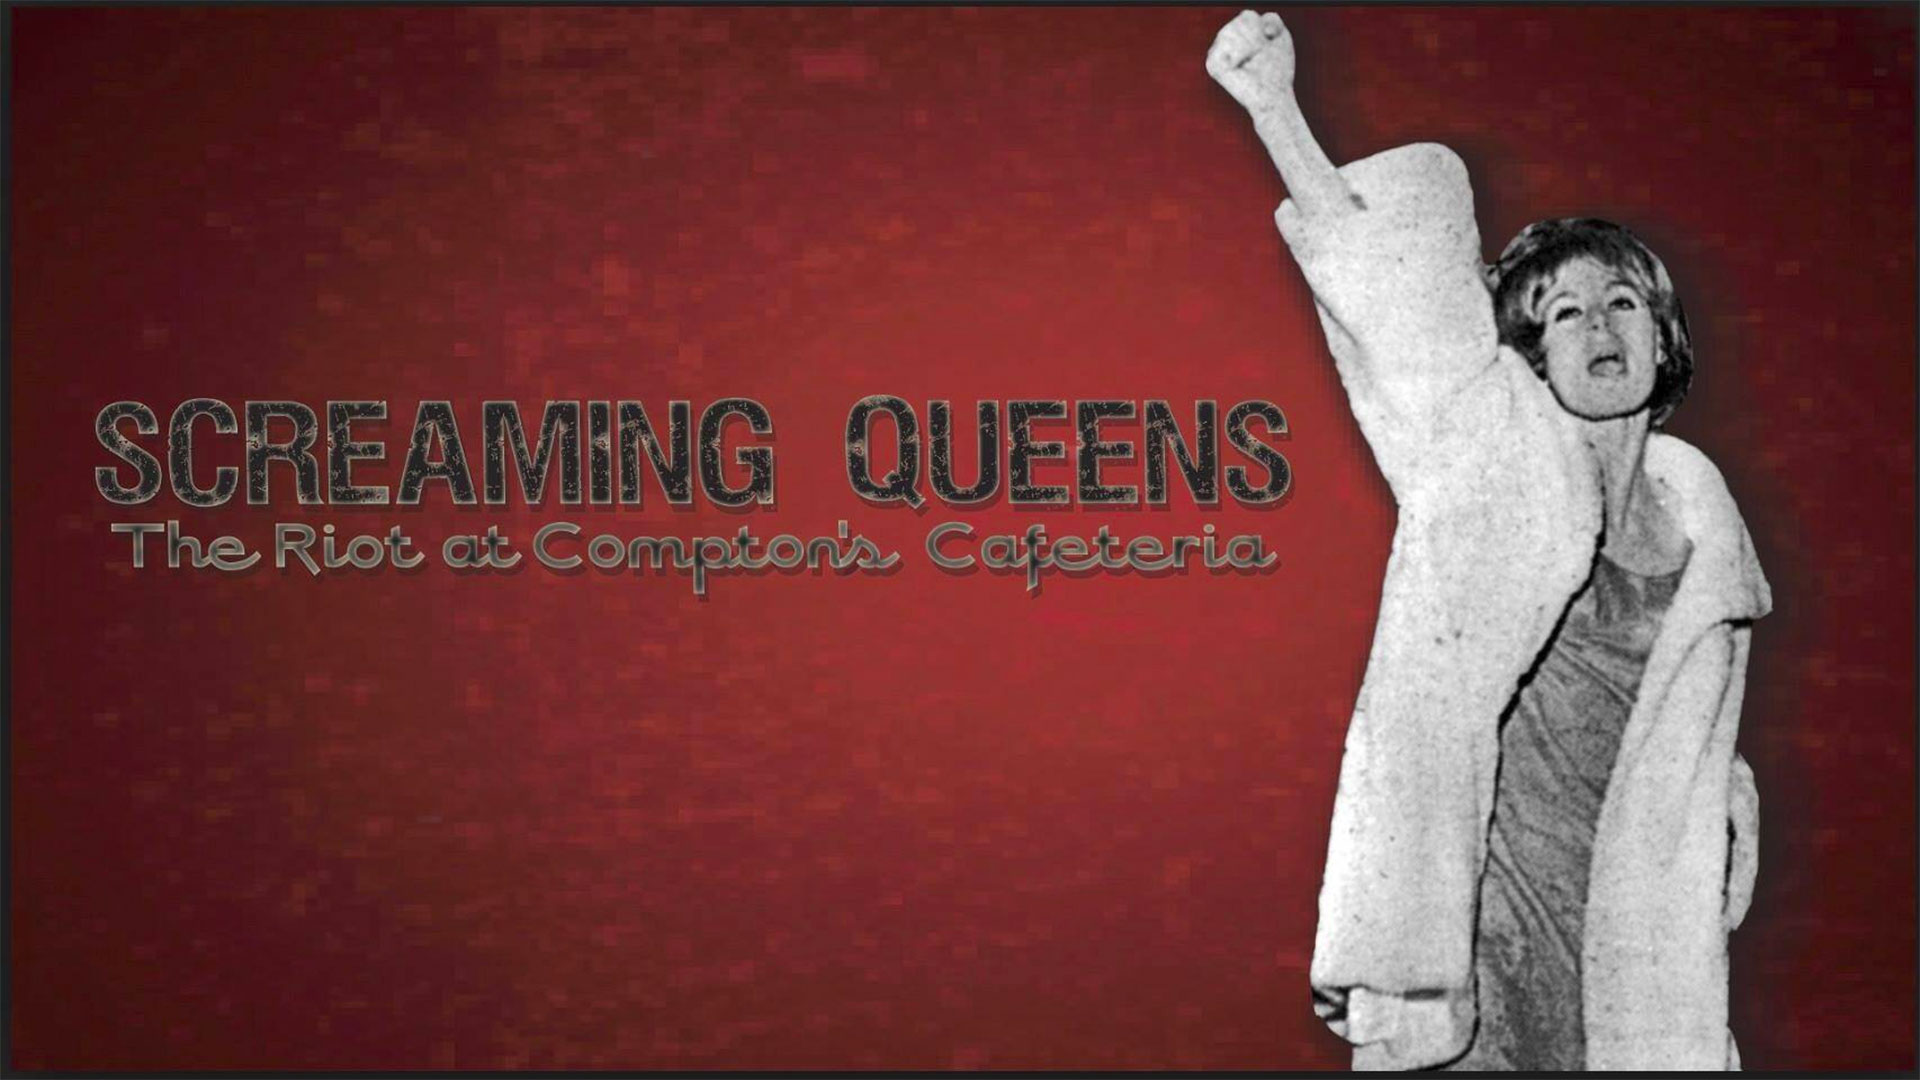 Screaming Queens logo with 1960s black and white picture of a drag queen with fist outstretched upwards